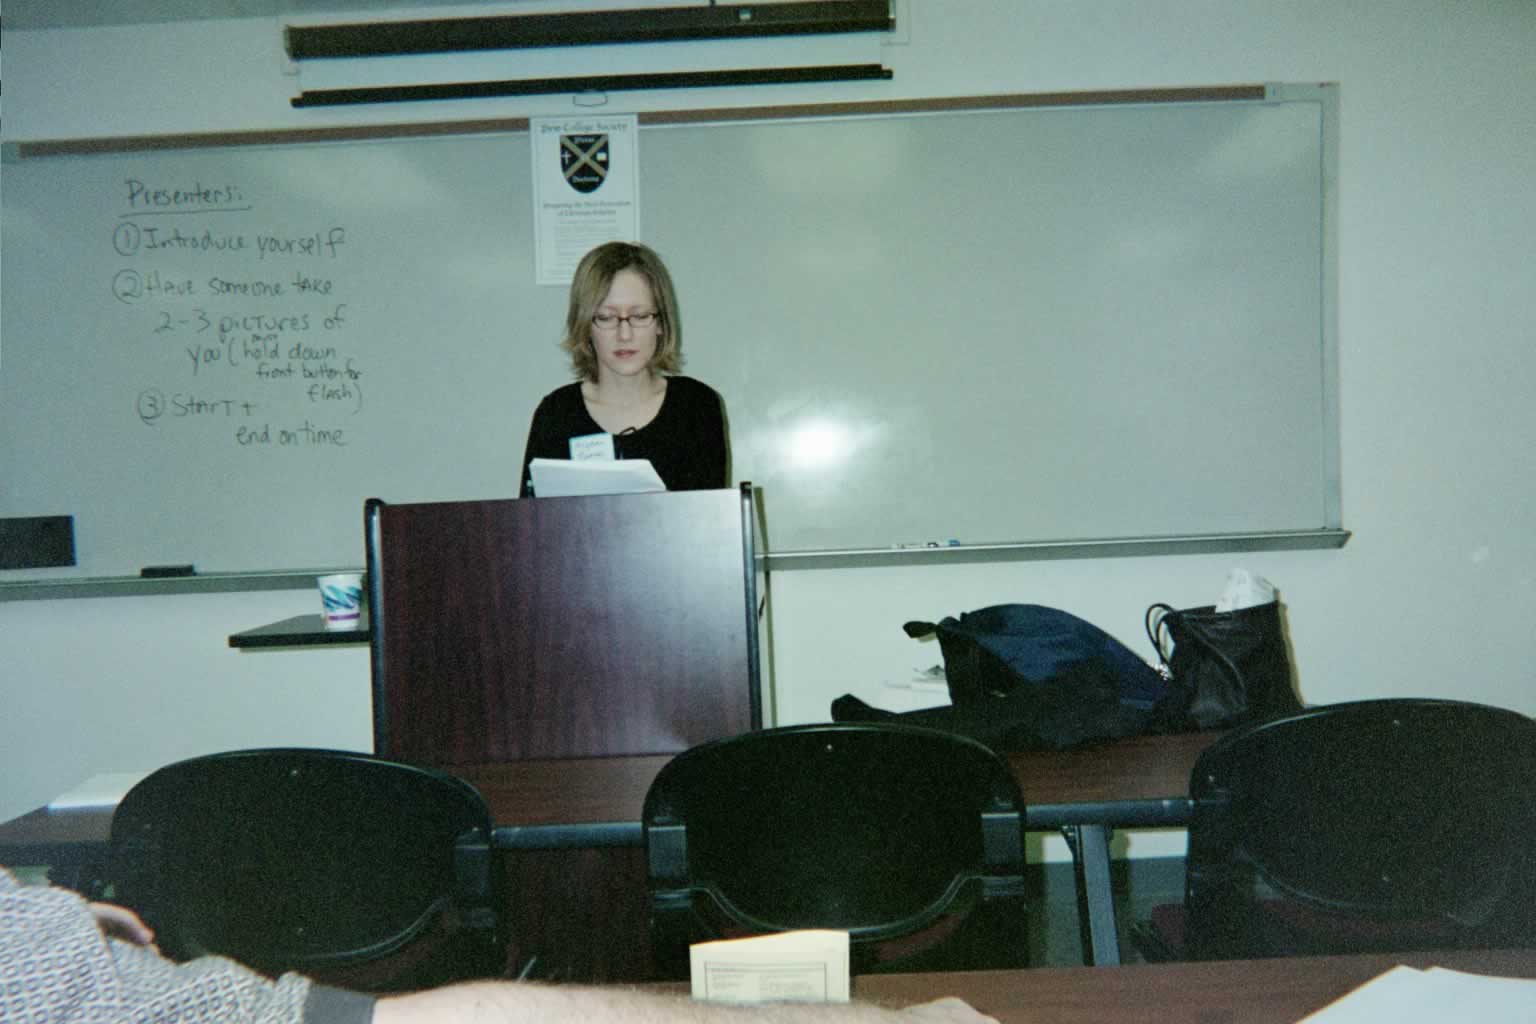 picture of a woman standing behind a podium reading from a piece of paper